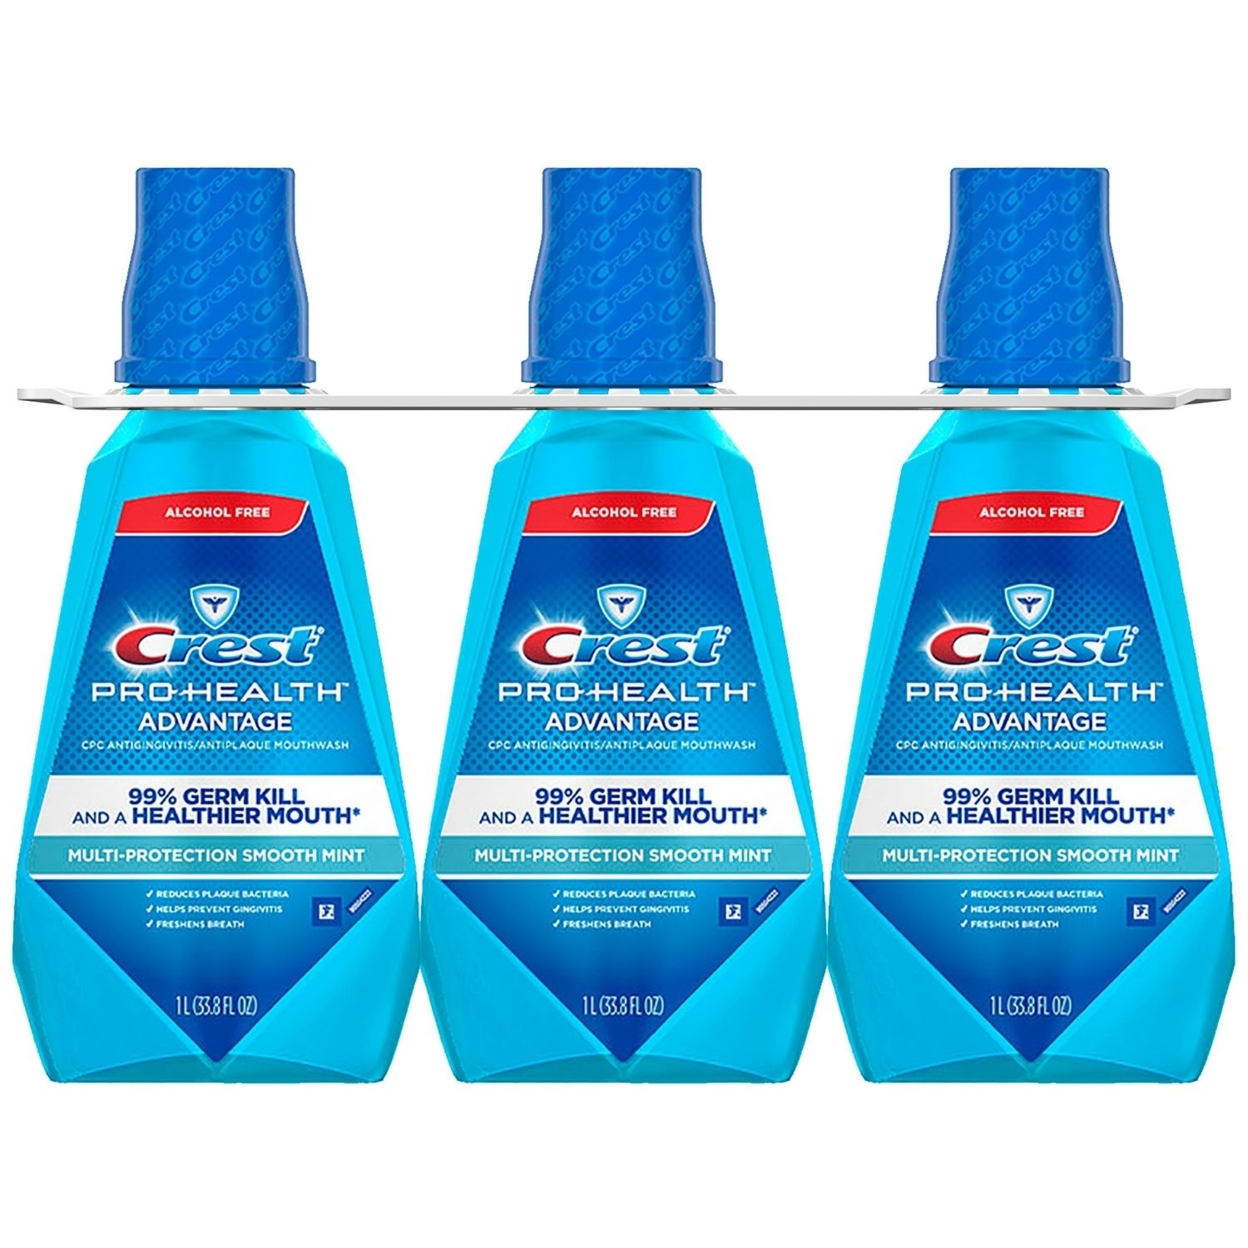 Crest ProHealth Advantage Rinse, Smooth Mint (33.8 Fluid Ounce, 3 Pack)